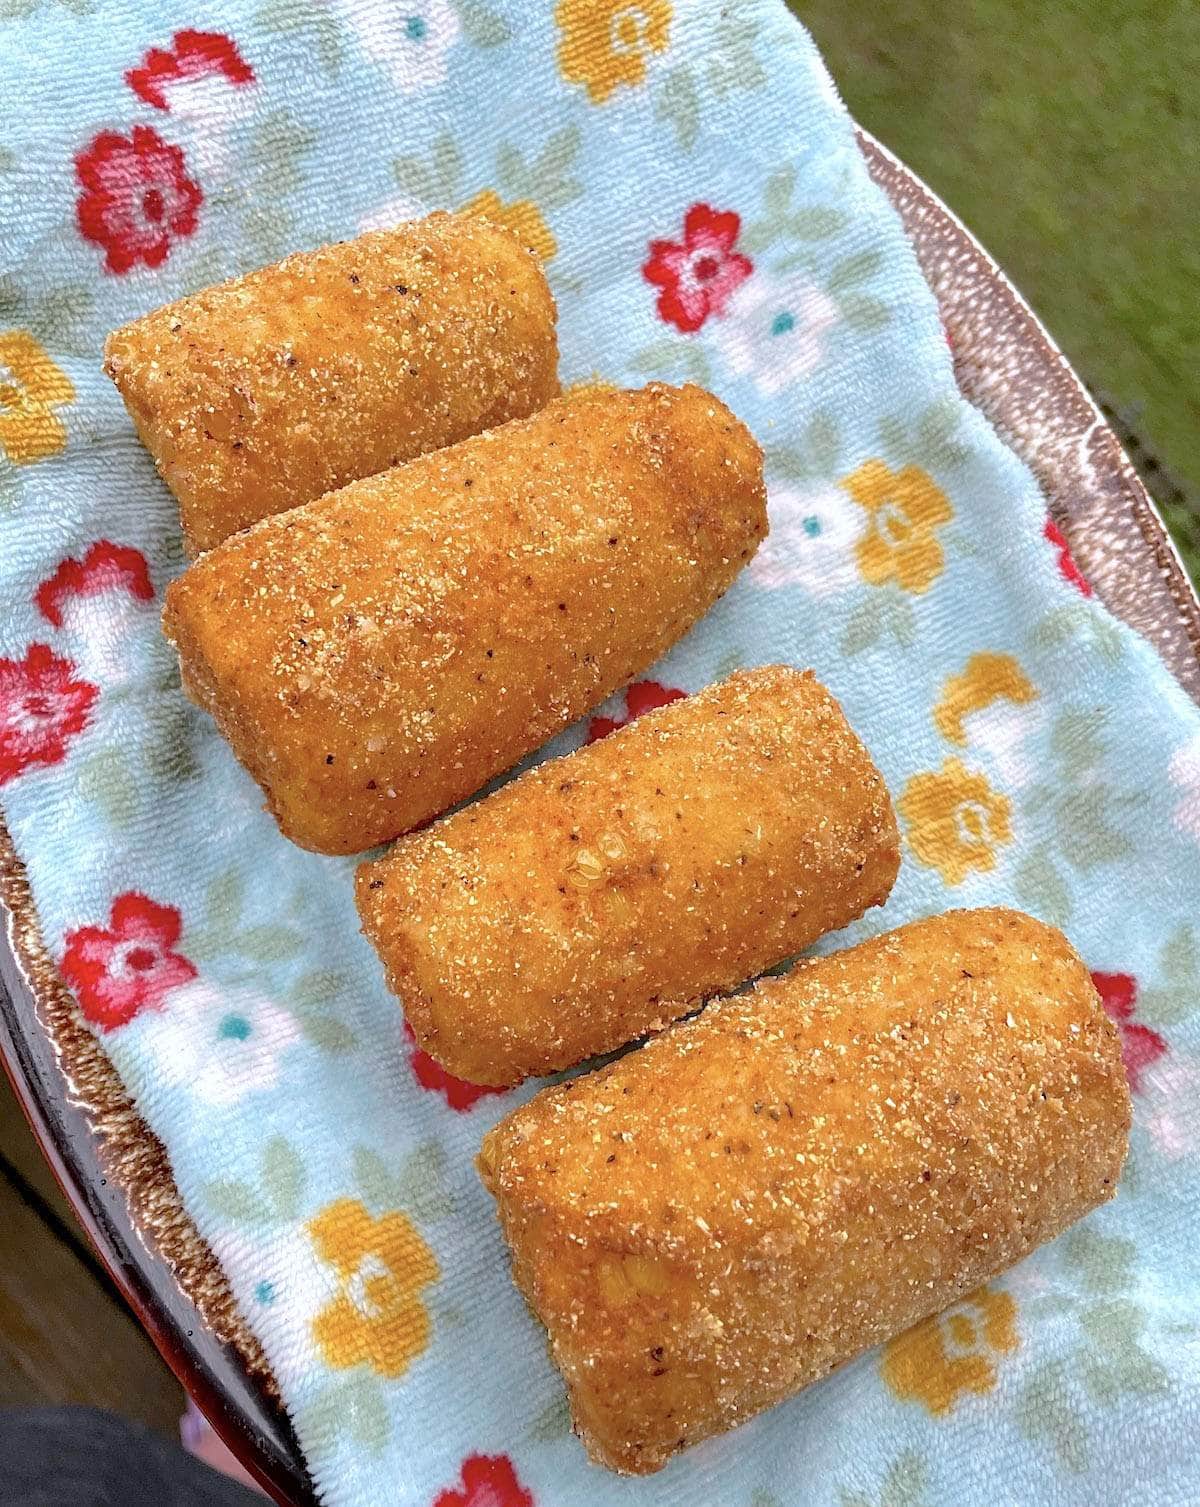 Four pieces of fried corn on the cob on a blue towel on a plate.